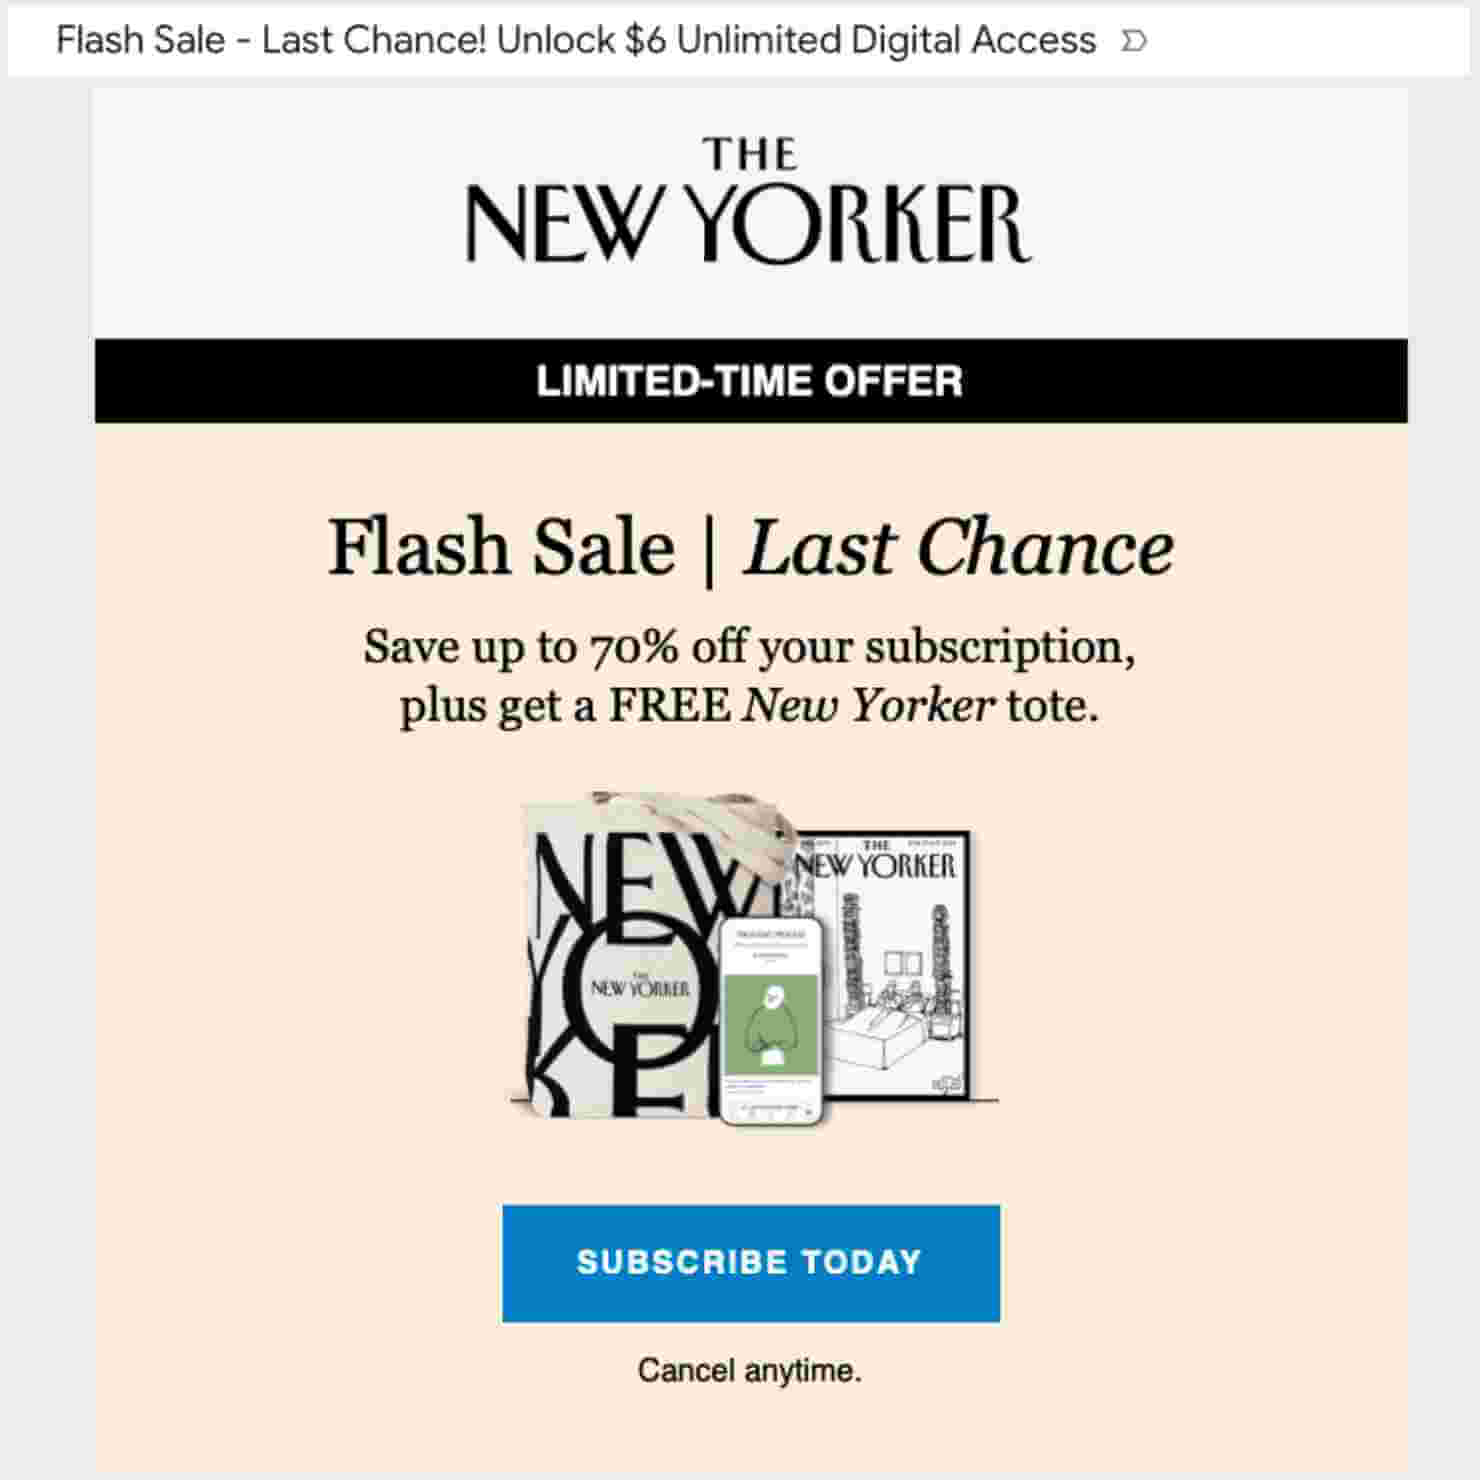 New Yorker flash sale example. Email subject line says "Flash Sale - Last Chance! Unlock  Unlimited Digital Access." Email content includes "Save up to 70% off your subscription, plus get a FREE New Yorker tote."